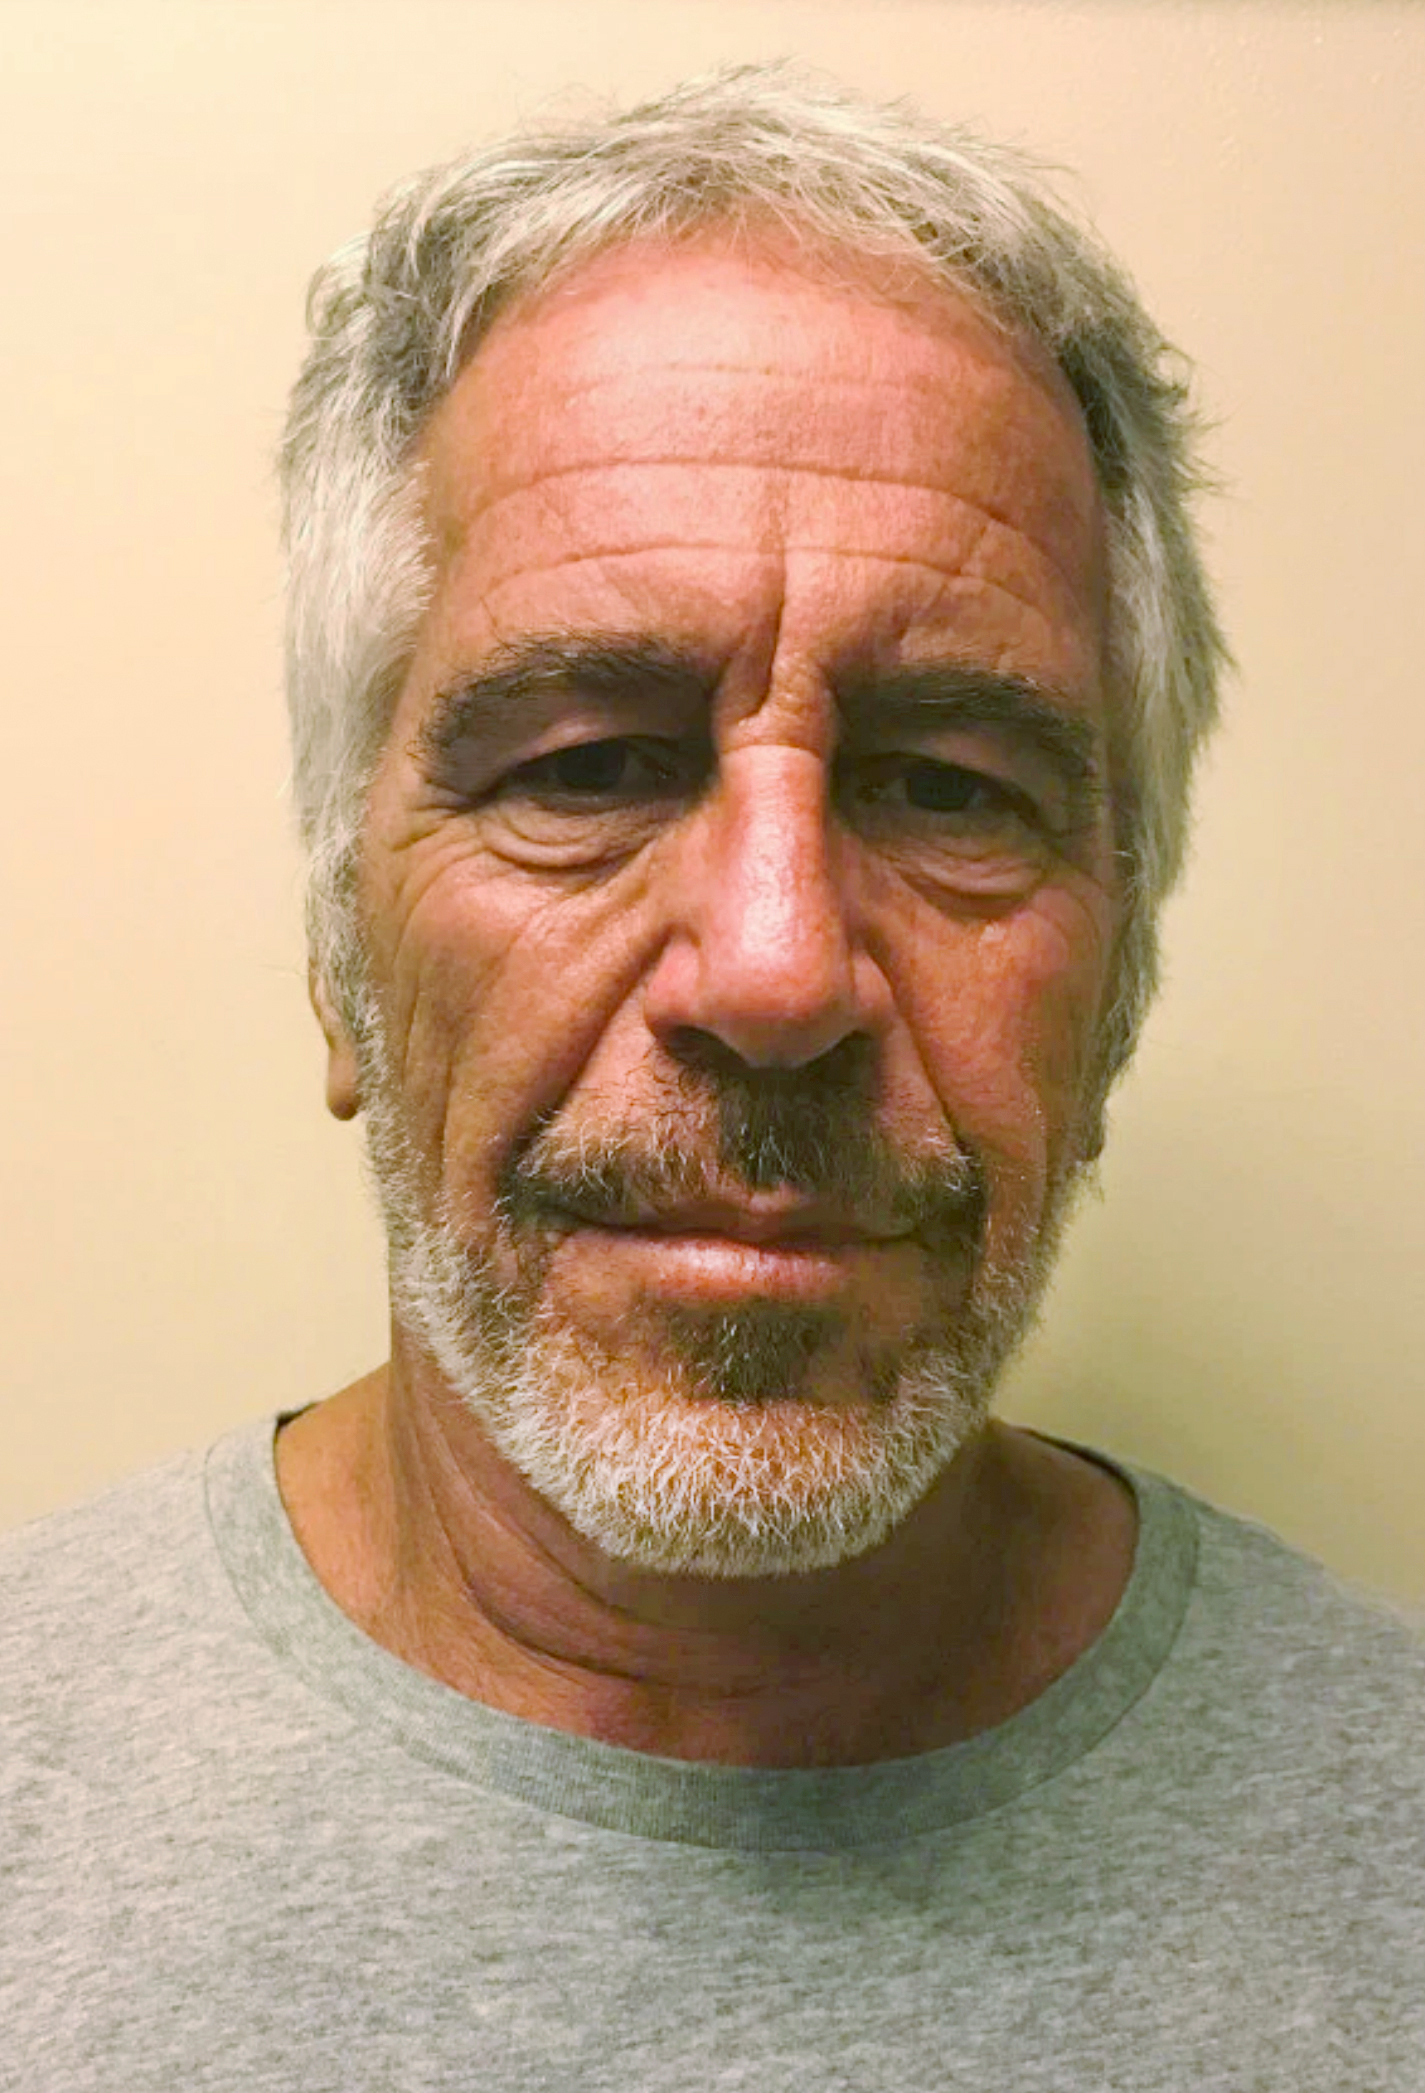 This March 28, 2017 image provided by the New York State Sex Offender Registry shows Jeffrey Epstein. (AP—AP)